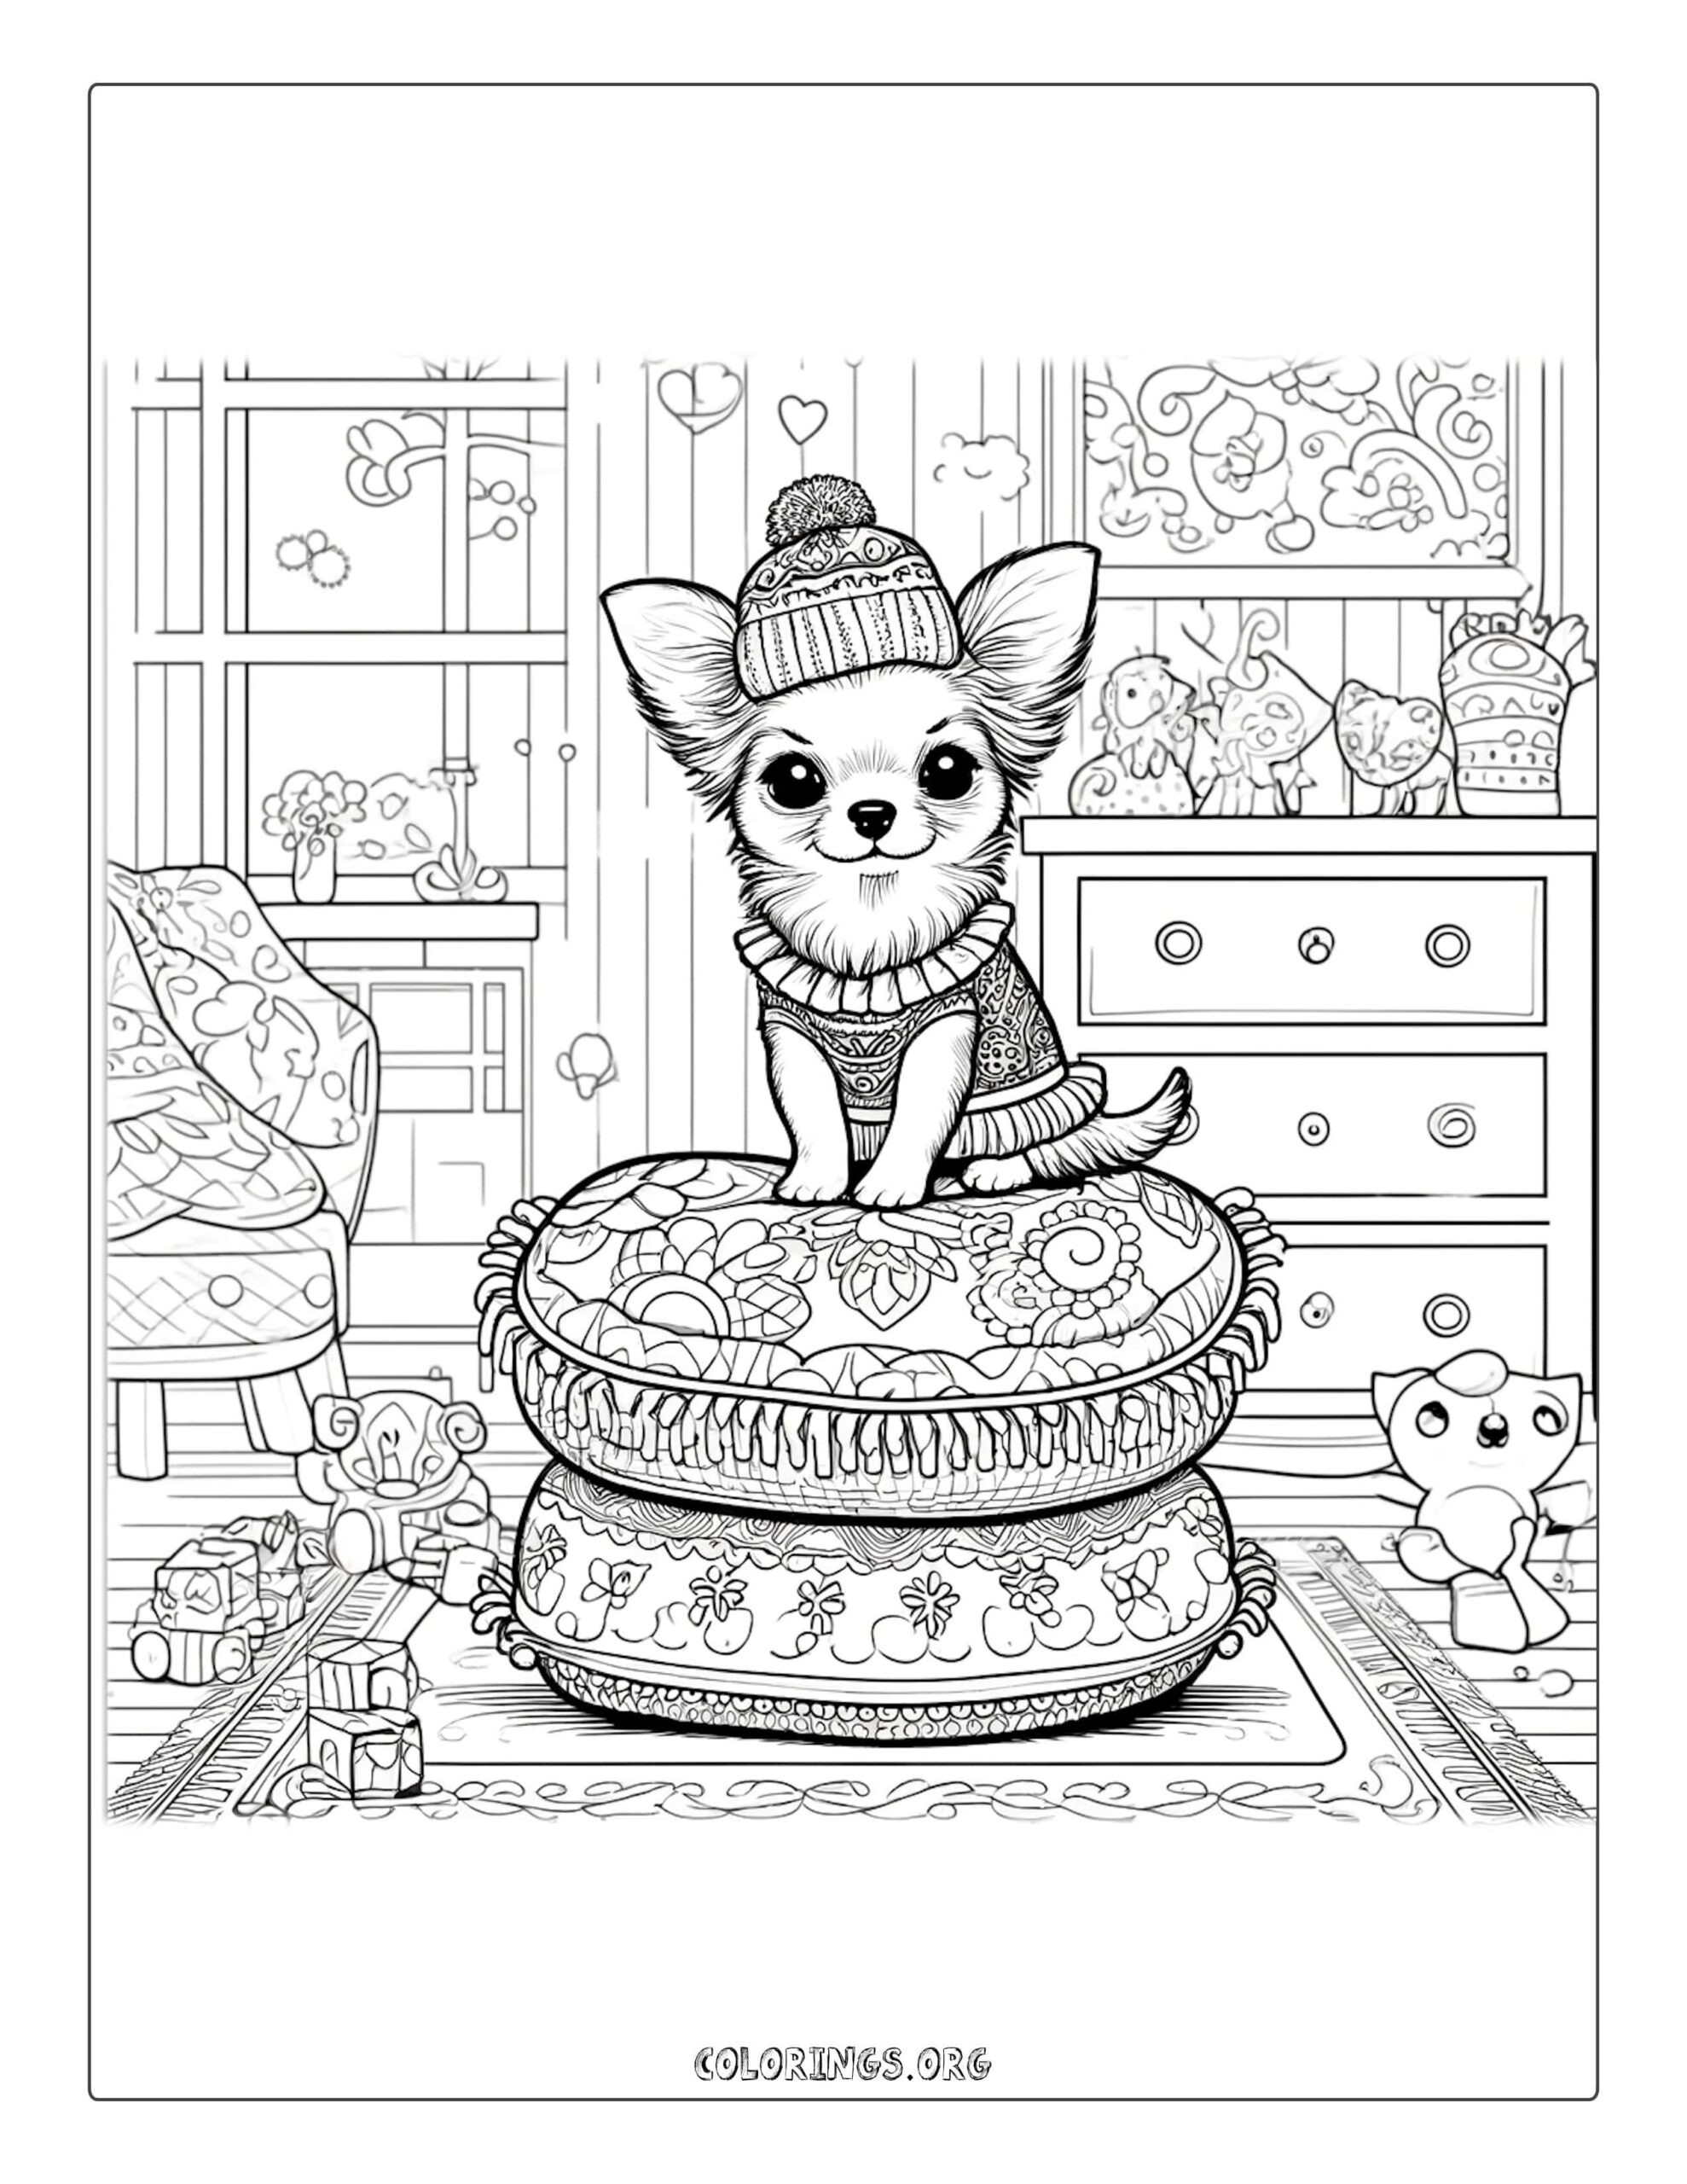 Chihuahua on cushion coloring page